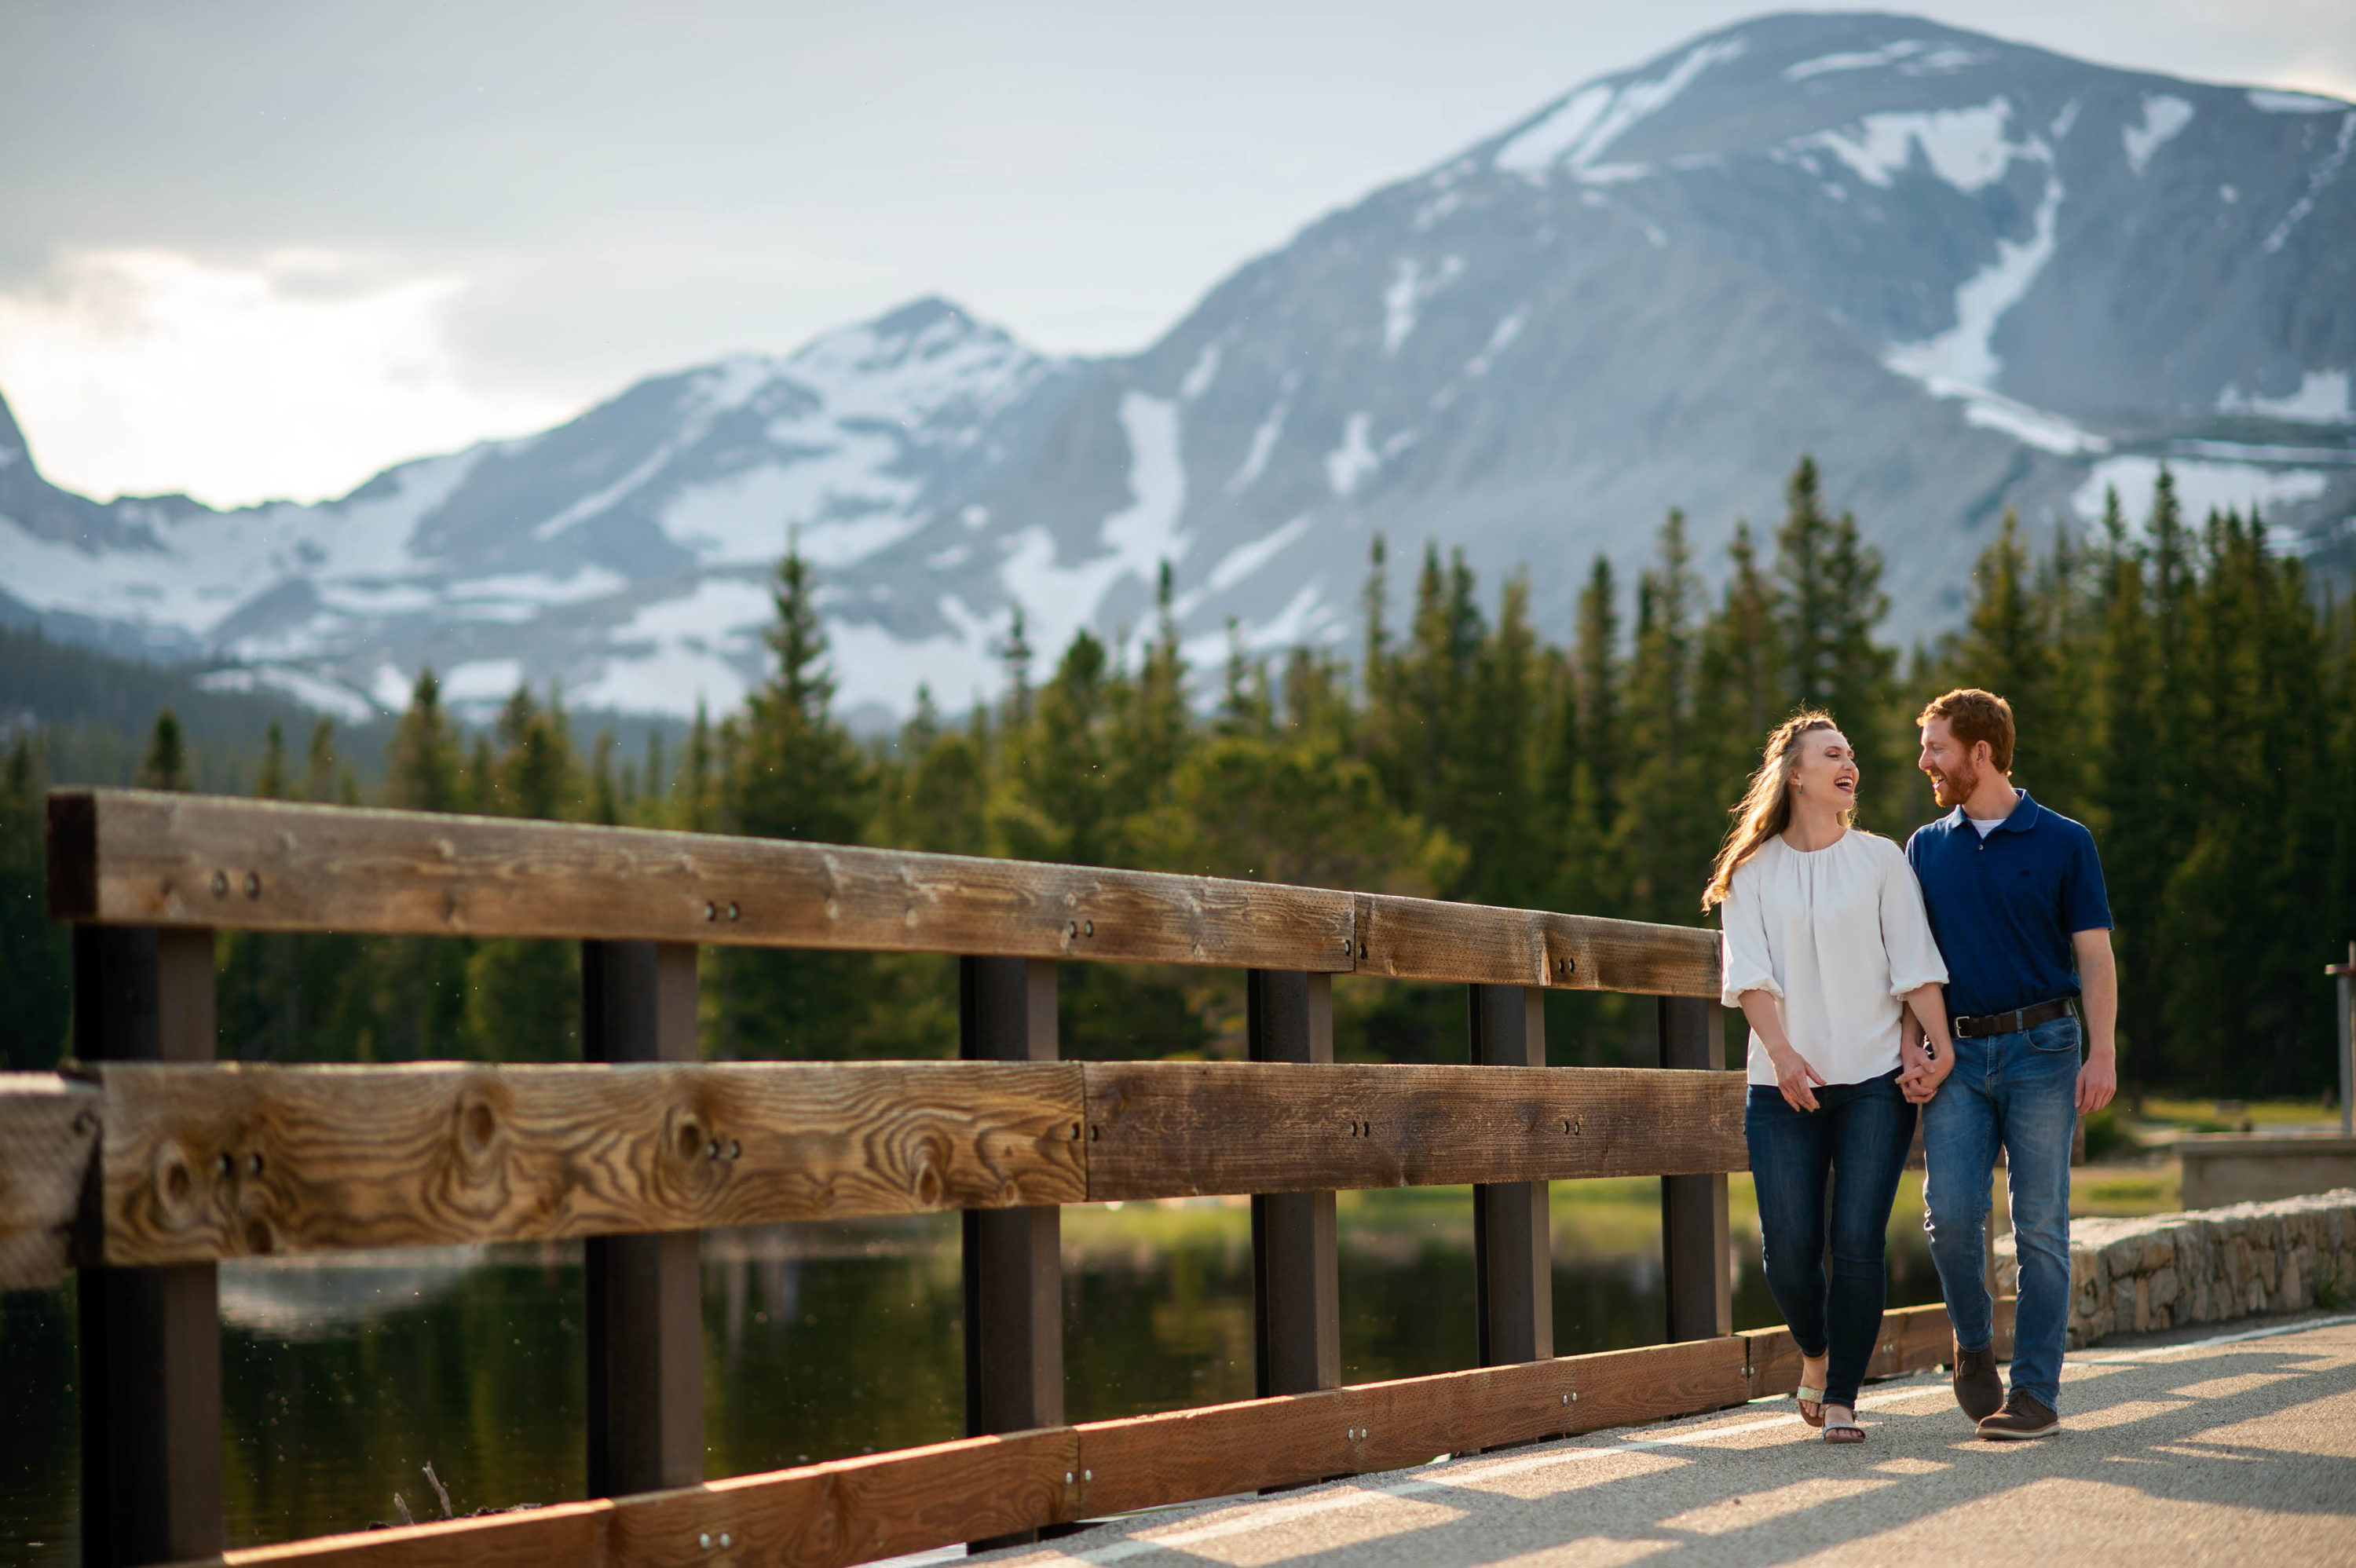 Brainard Lake engagement photos in Boulder County, Colorado, in the spring and summer.